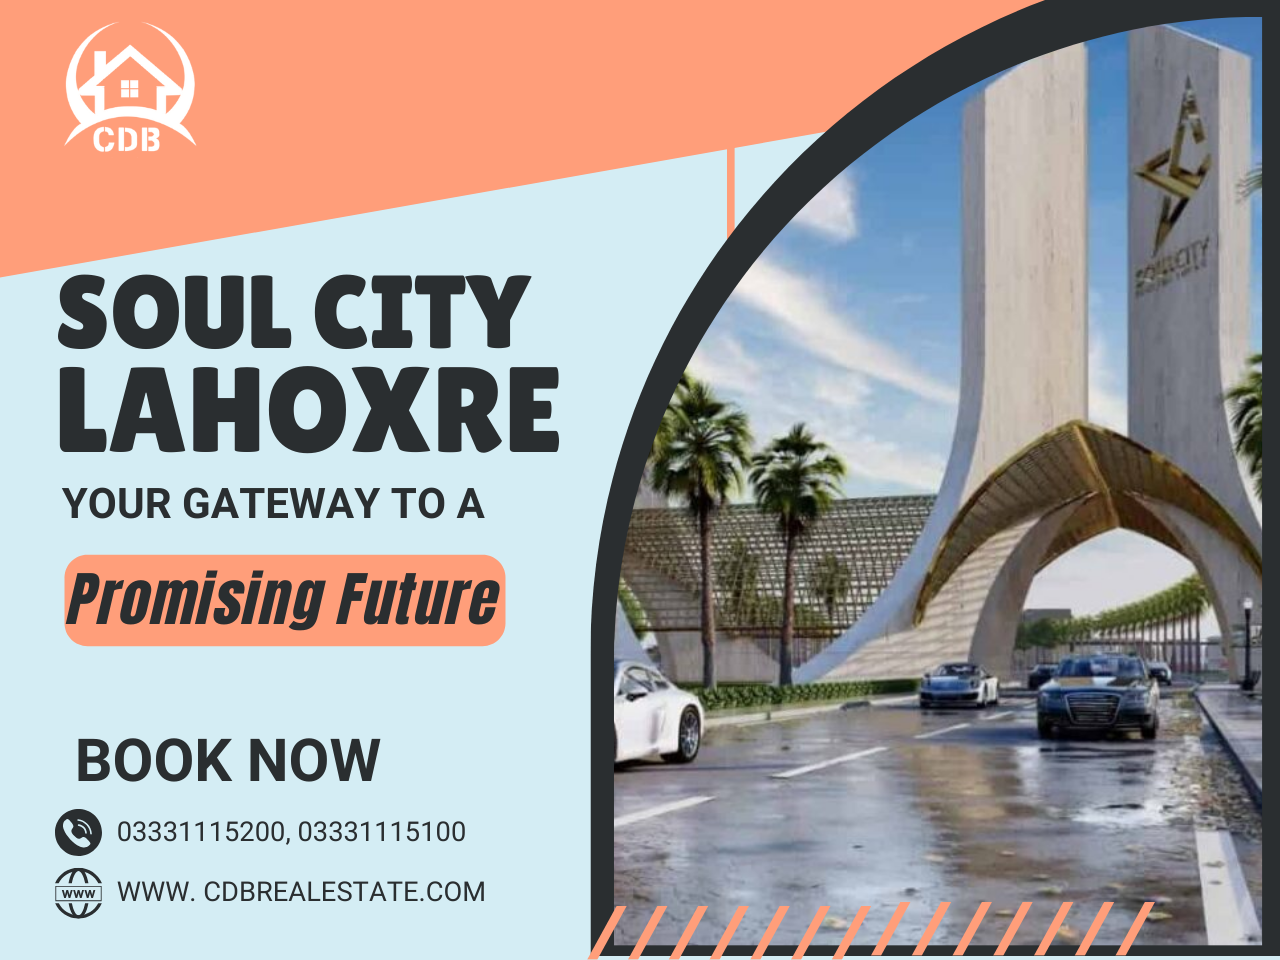 Soul City Lahore: Your Gateway to a Promising Future